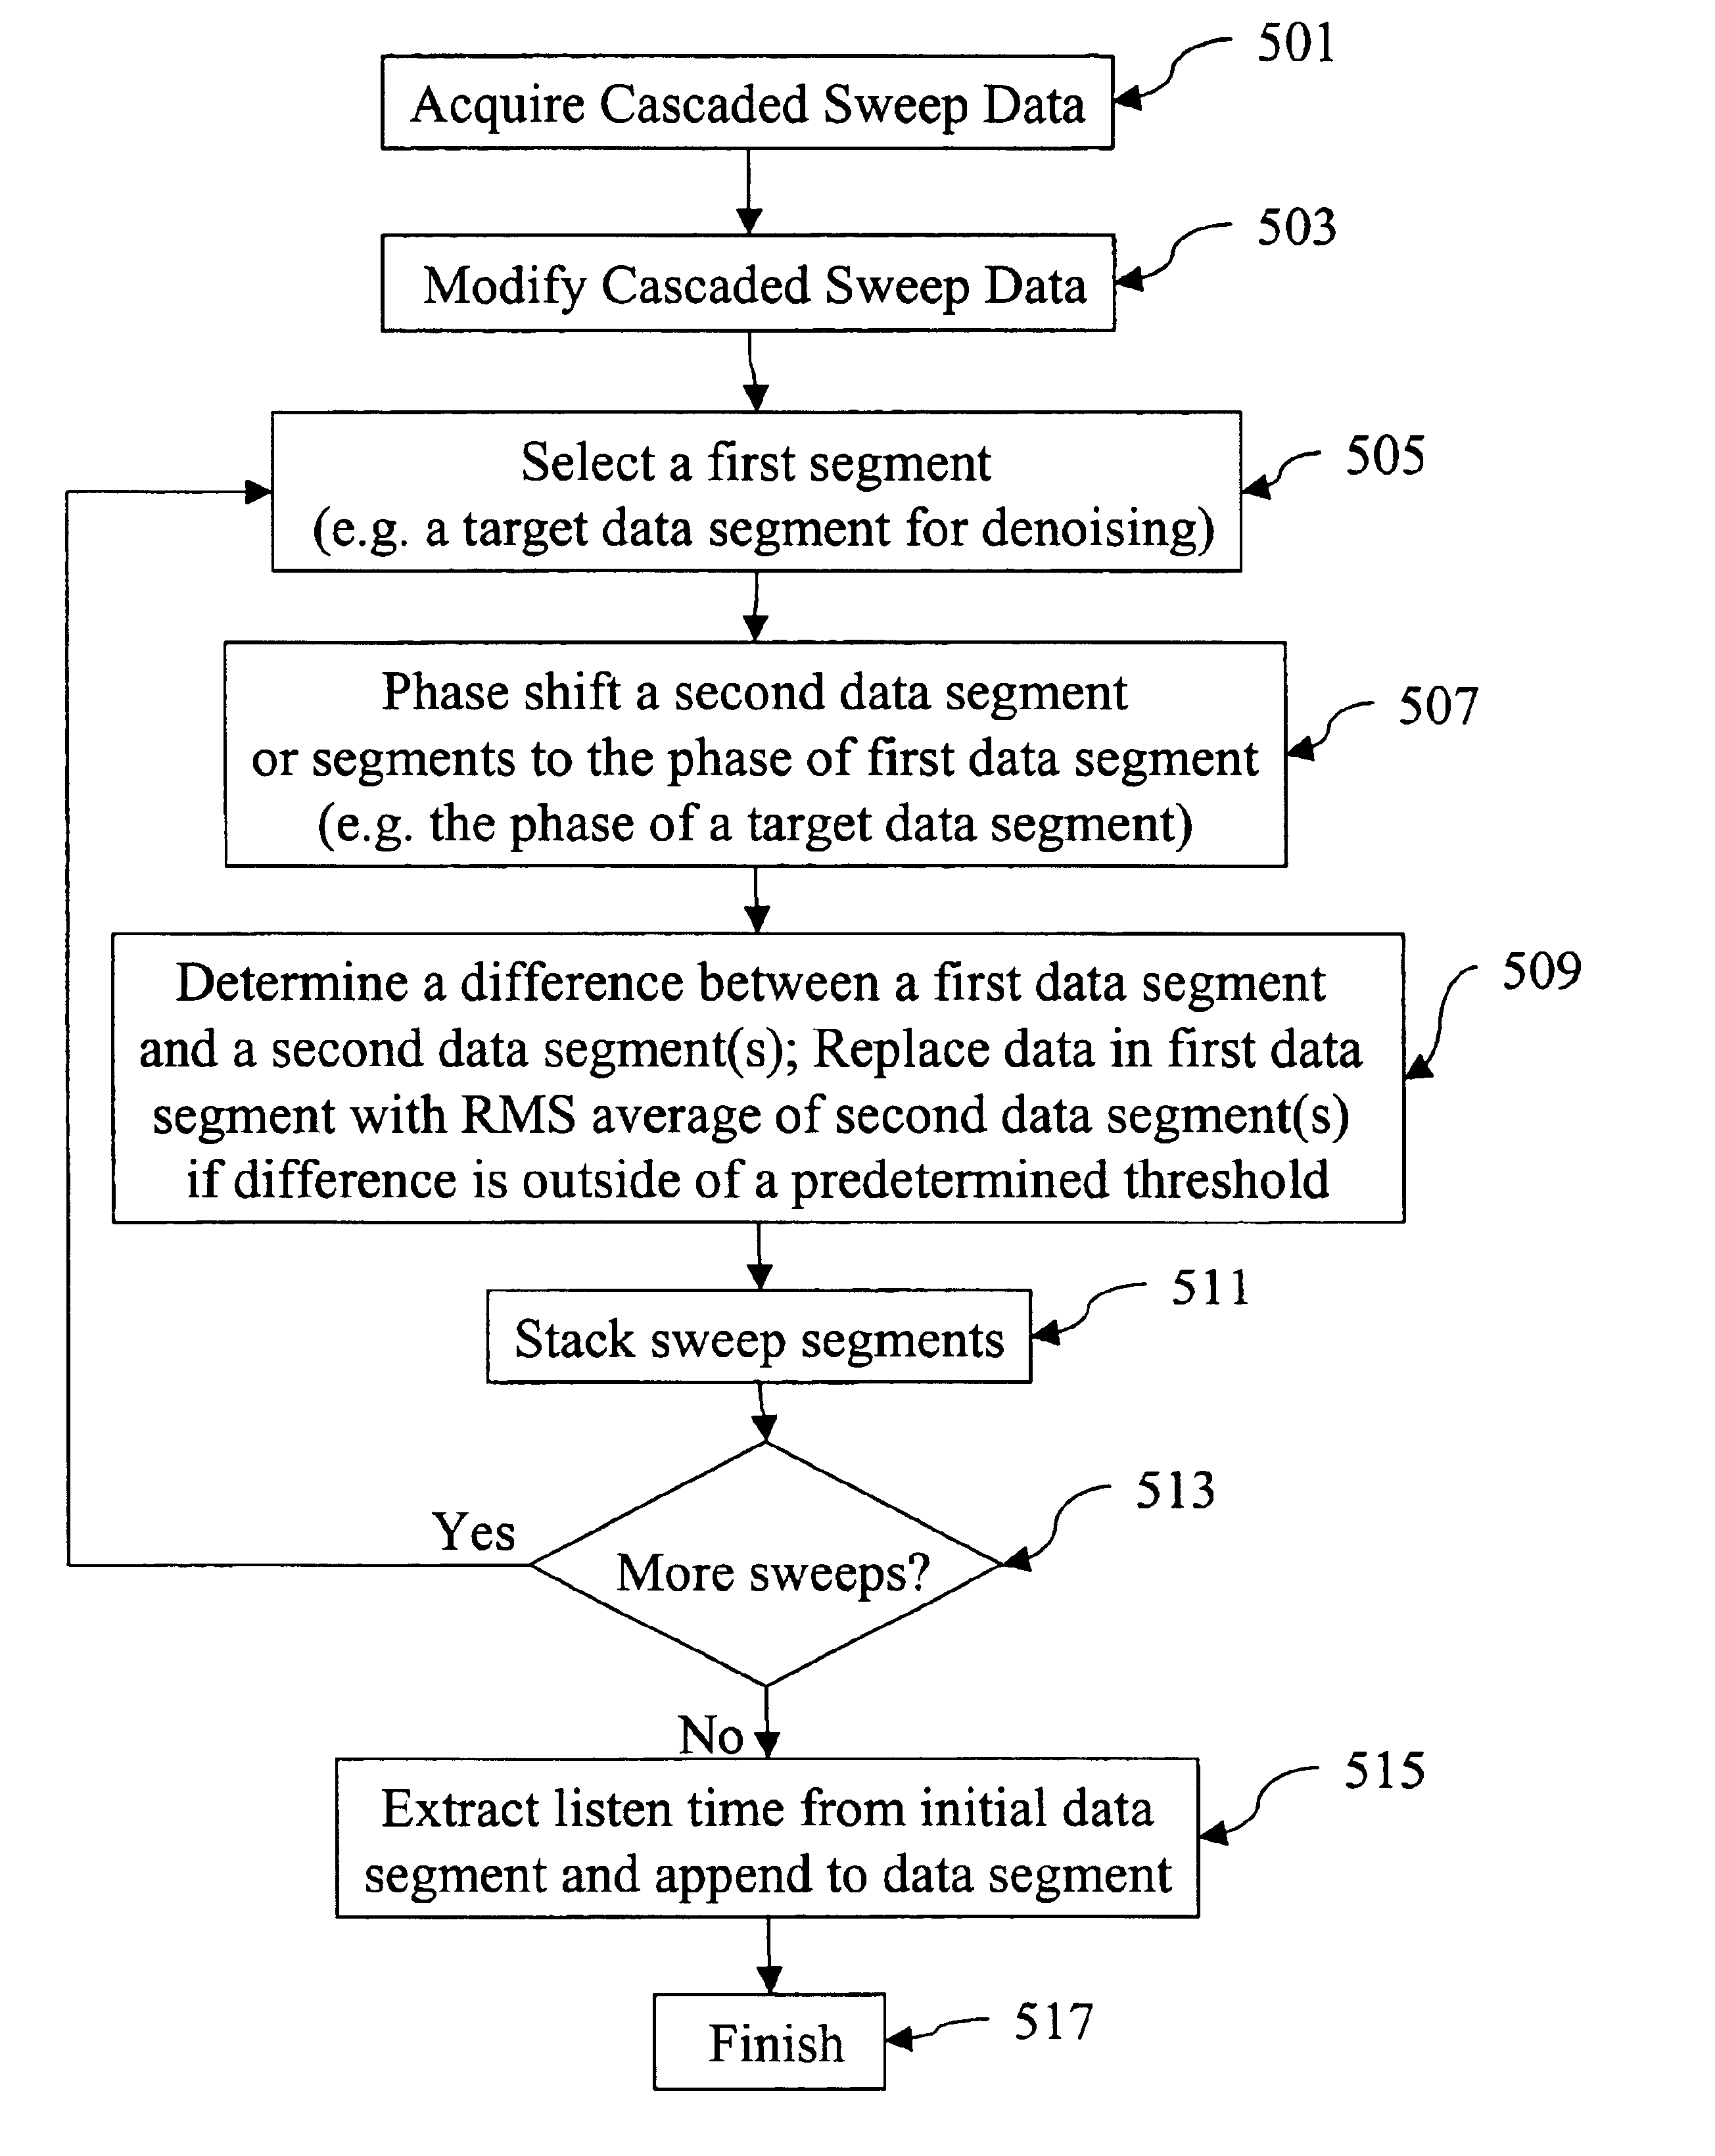 Method of noise removal for cascaded sweep data